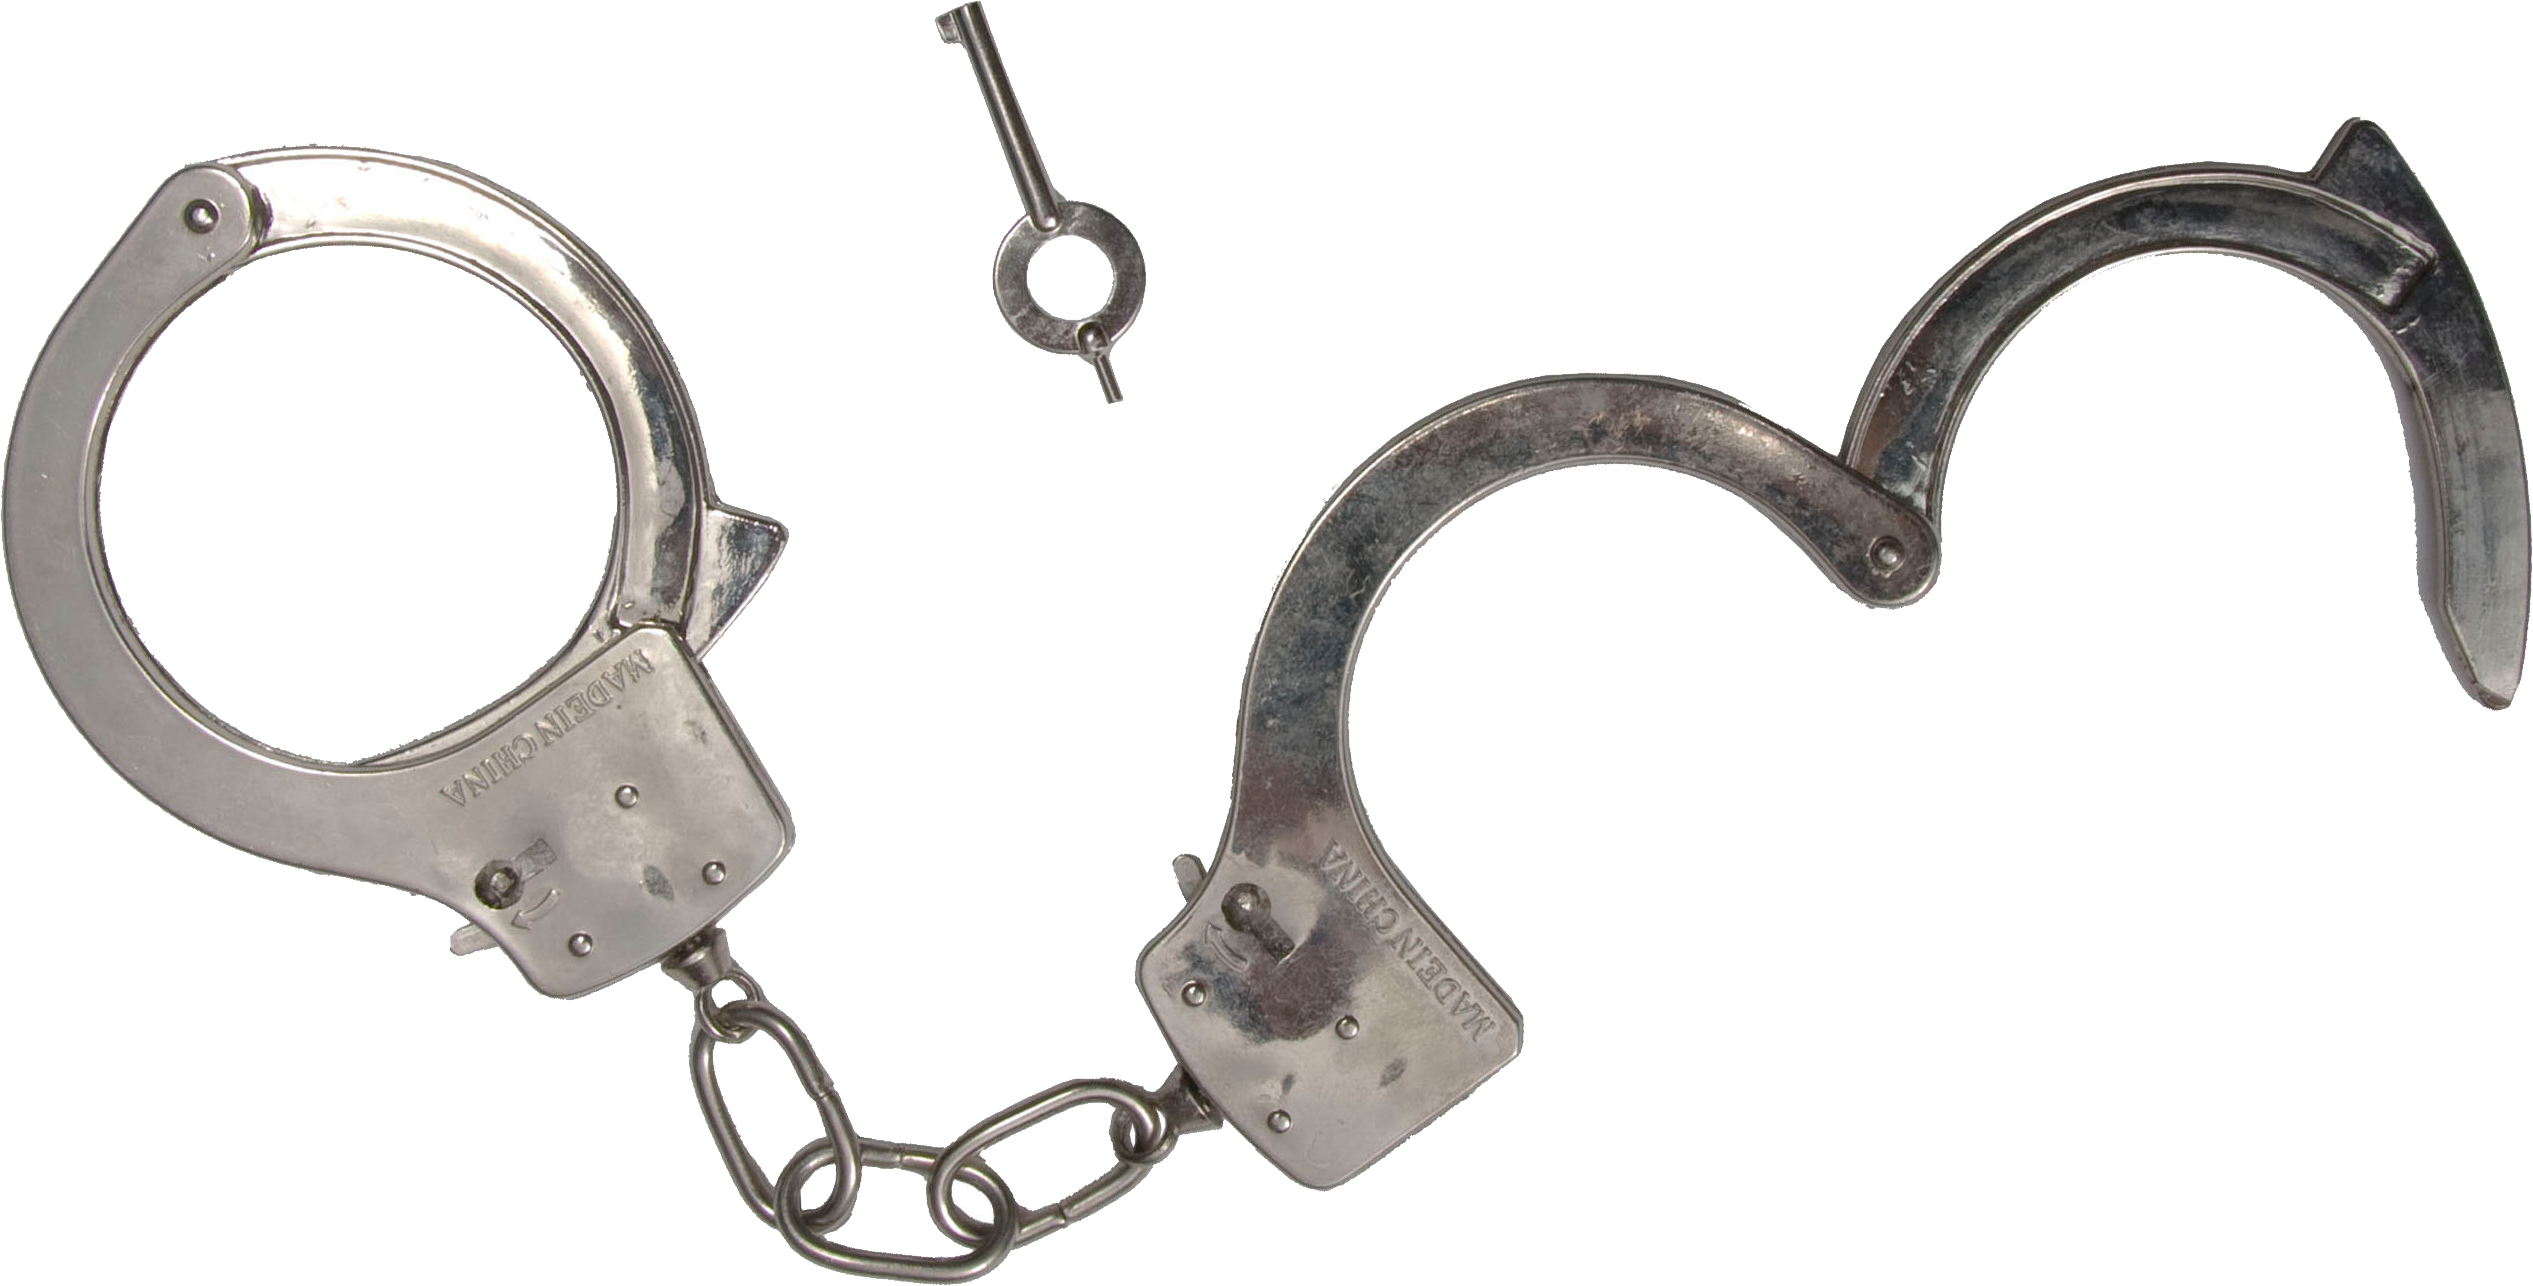 handcuffs png images download crazypngm crazy png images download #29626